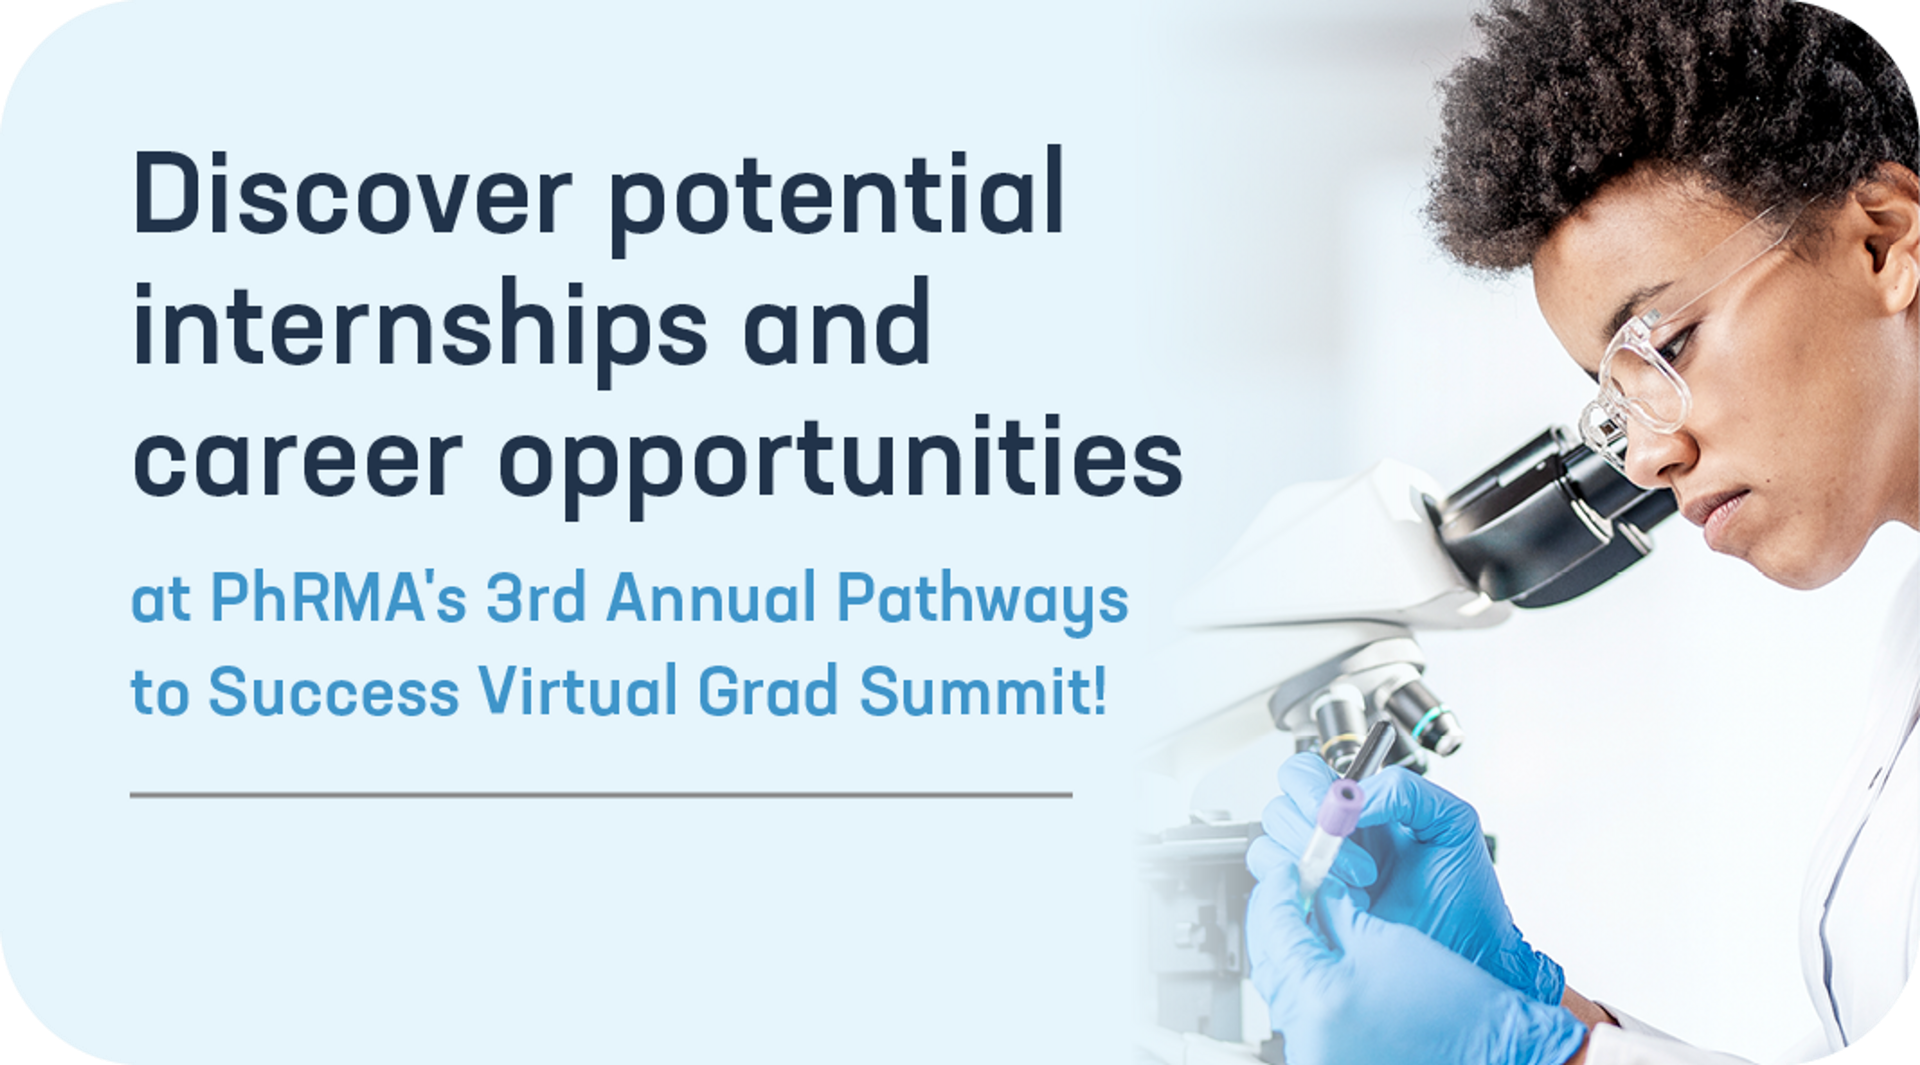 Photo of an African American female lab technician at work next to a microscope, with text reading "Discover potential internships and career opportunities at PhRMA's Annual Pathways to Success Virtual Grad Summit"